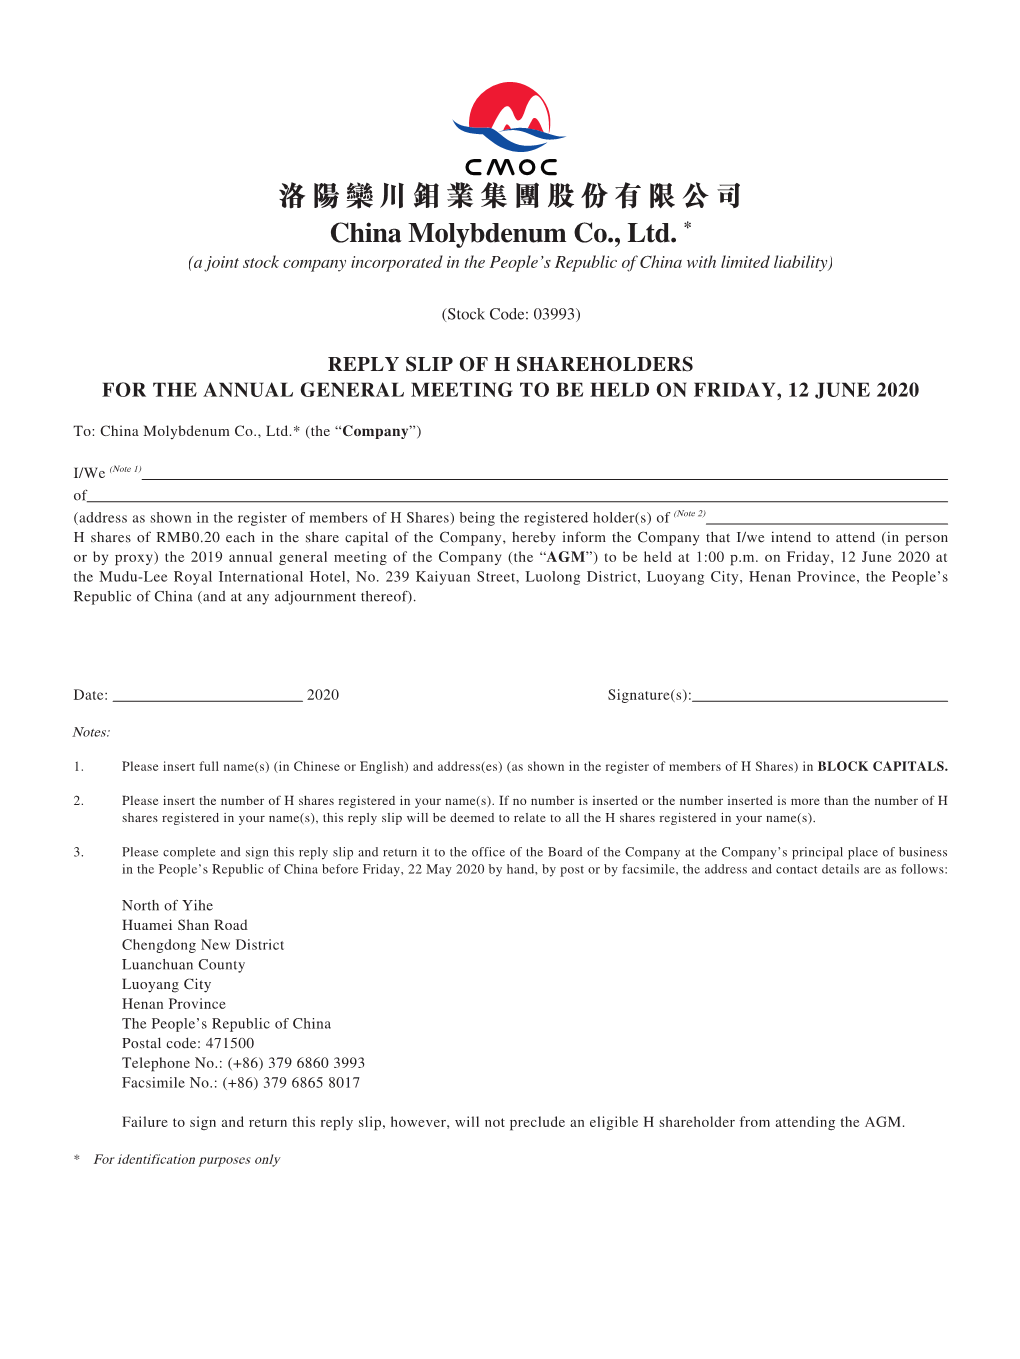 Reply Slip of H Shareholders for the Annual General Meeting to Be Held on Friday, 12 June 2020